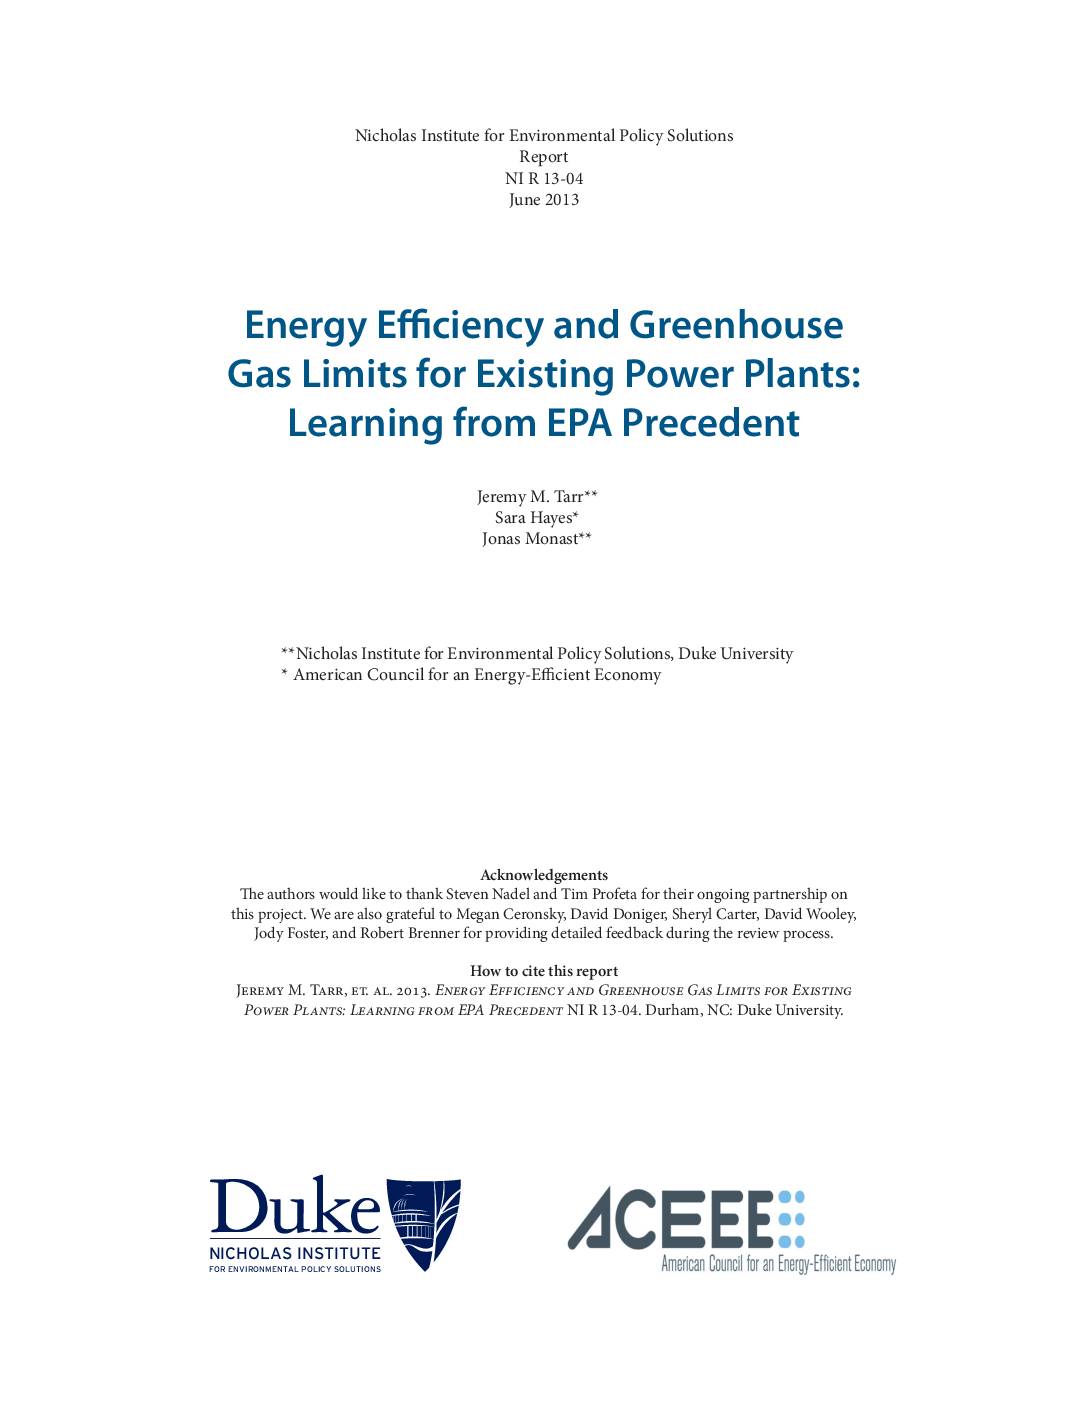 Energy Efficiency and Greenhouse Gas Limits for Existing Power Plants: Learning from EPA Precedent